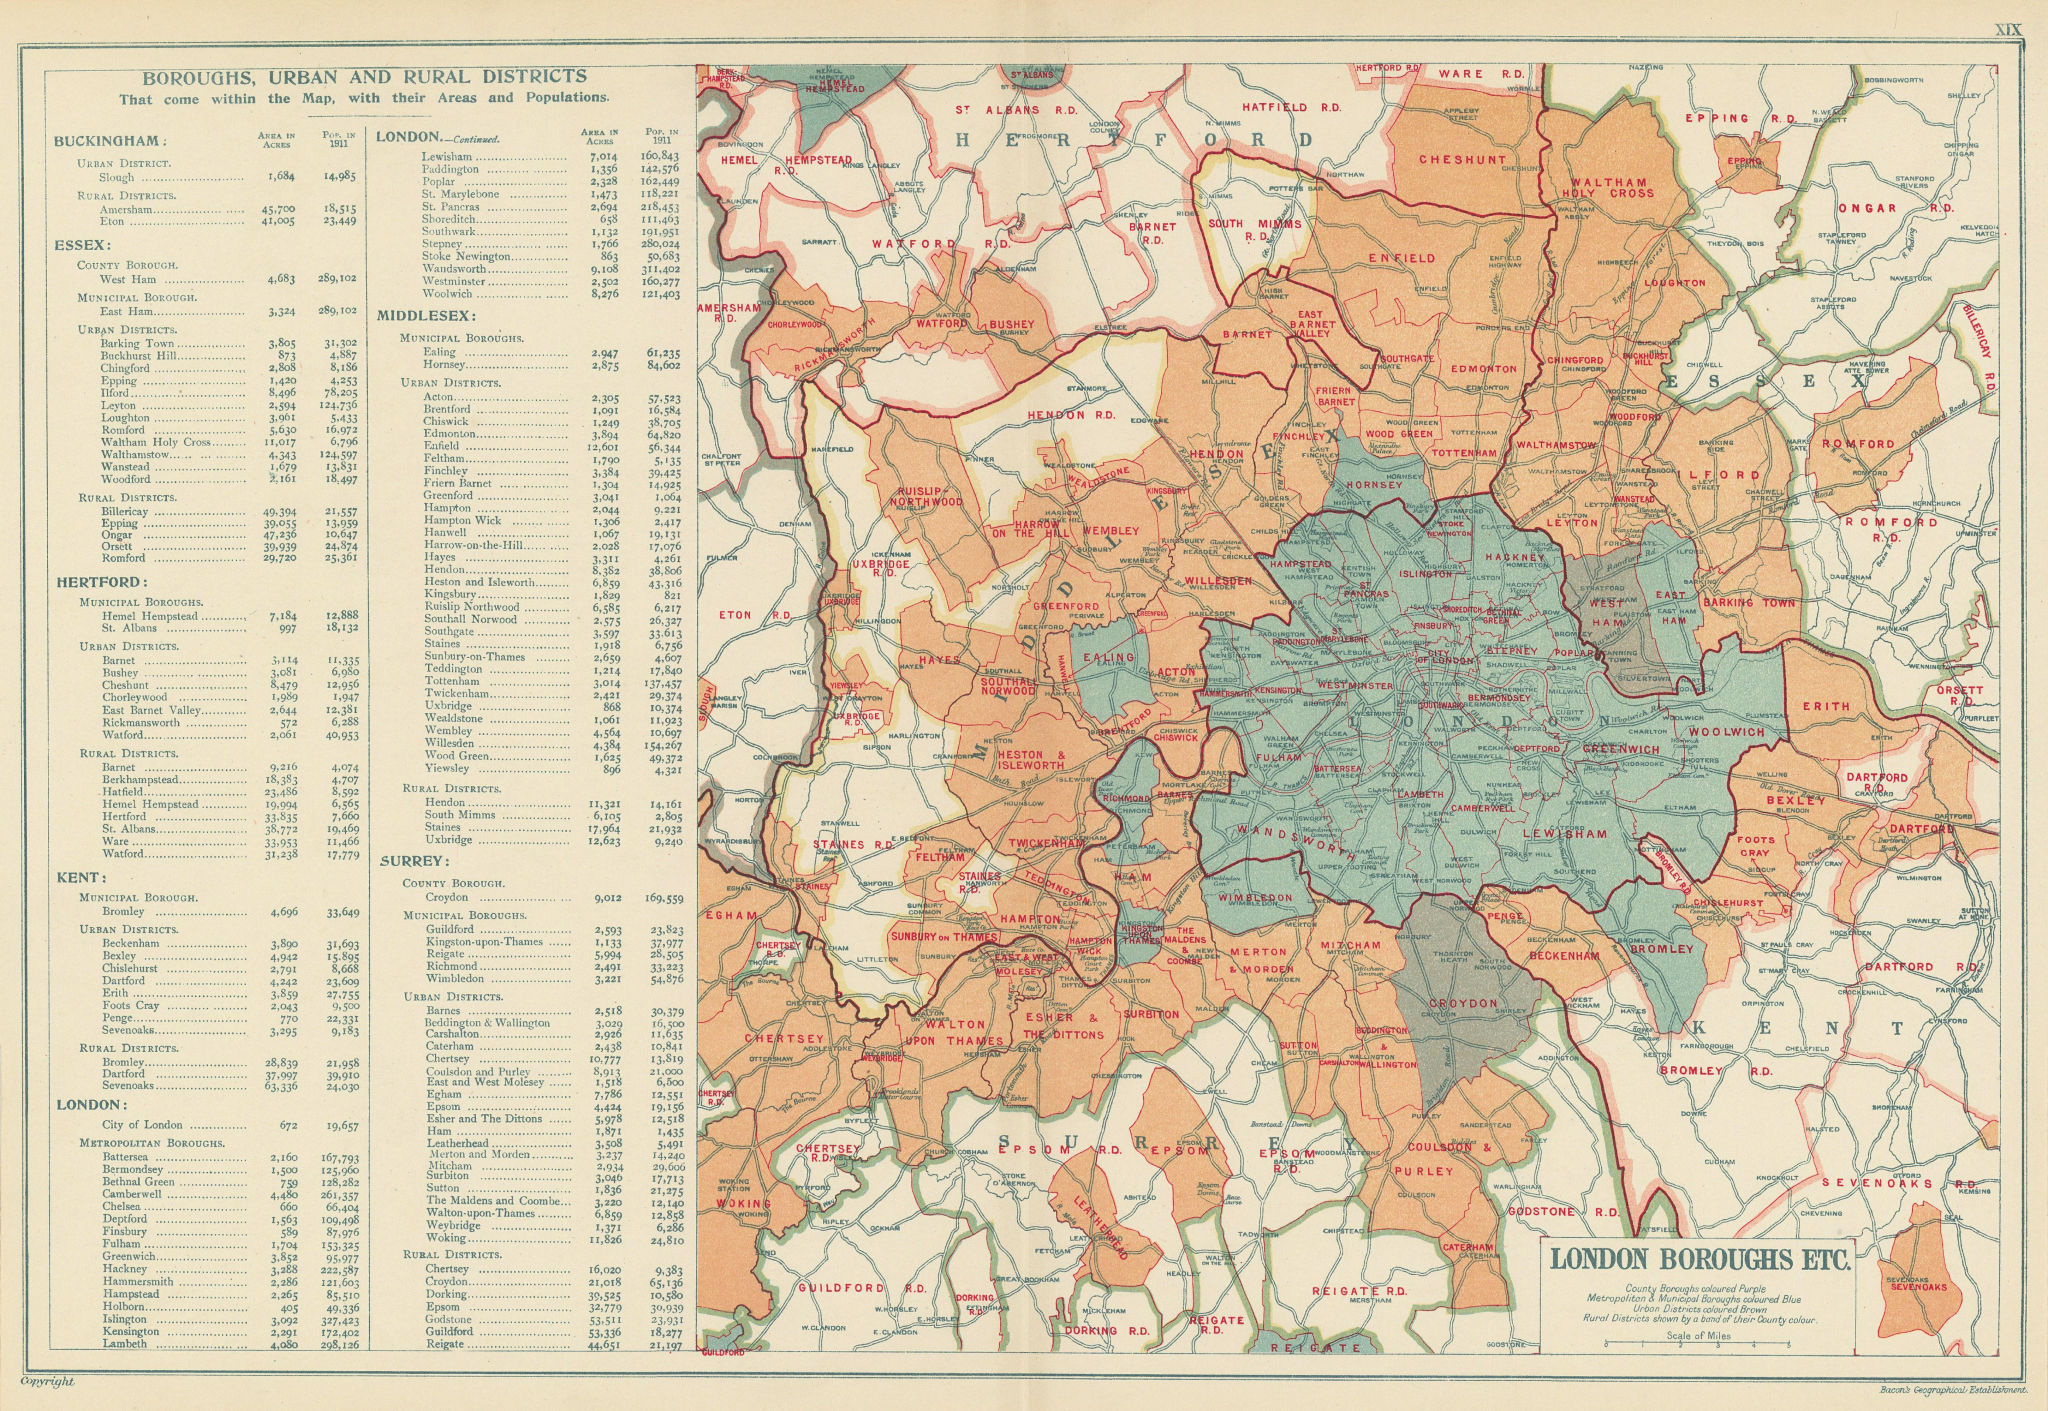 Associate Product LONDON showing Municipal Boroughs, Urban Districts & Rural areas. BACON 1923 map